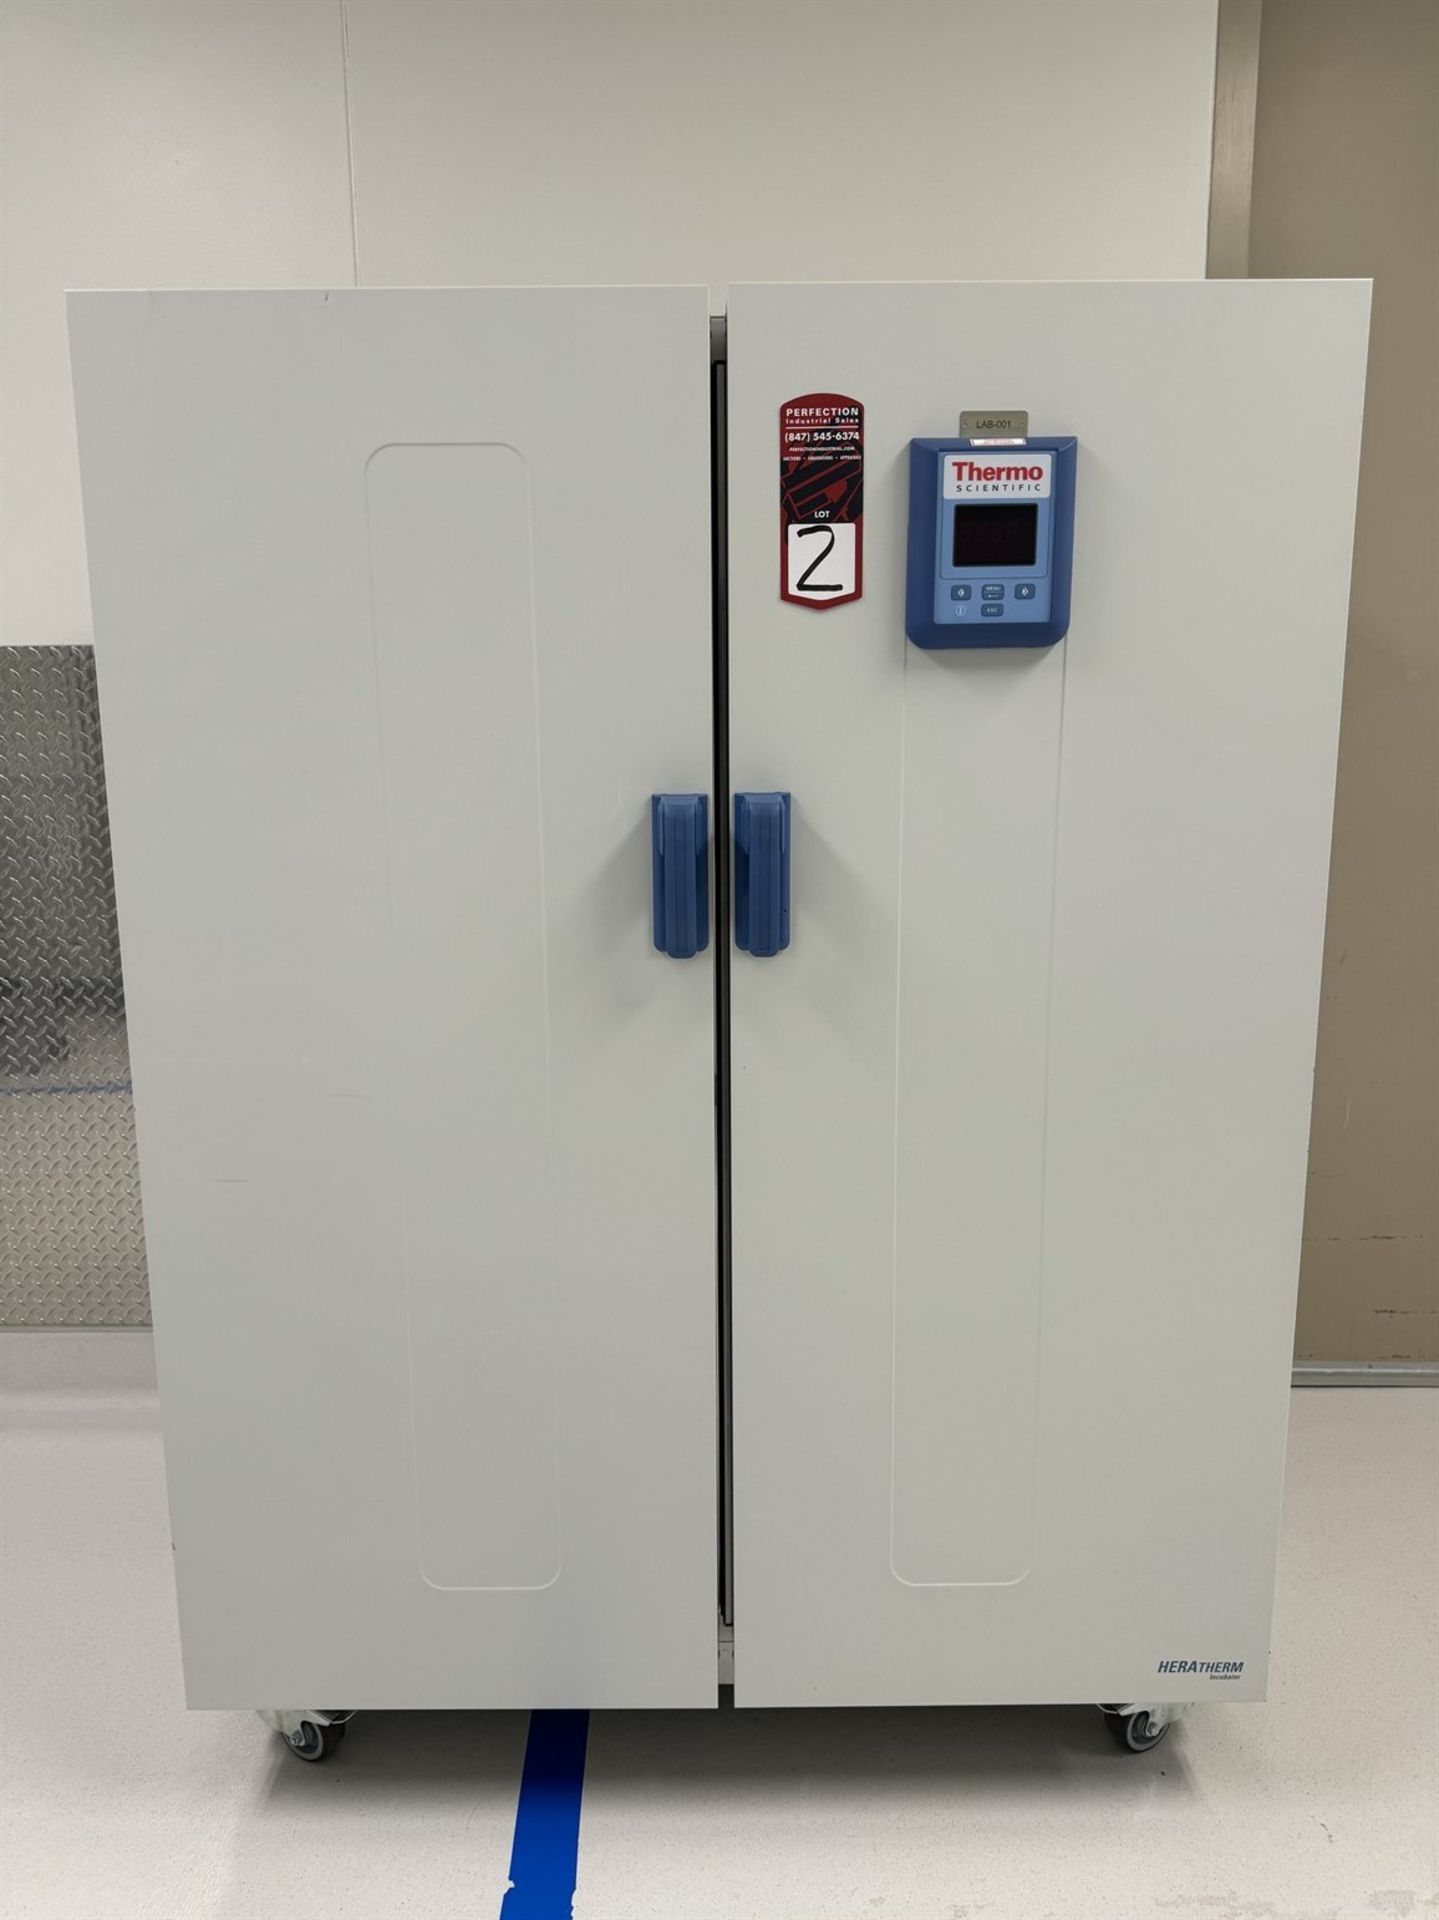 2014 THERMO SCIENTIFIC Heratherm IGS750 Incubator, s/n 41623840 - Image 2 of 8